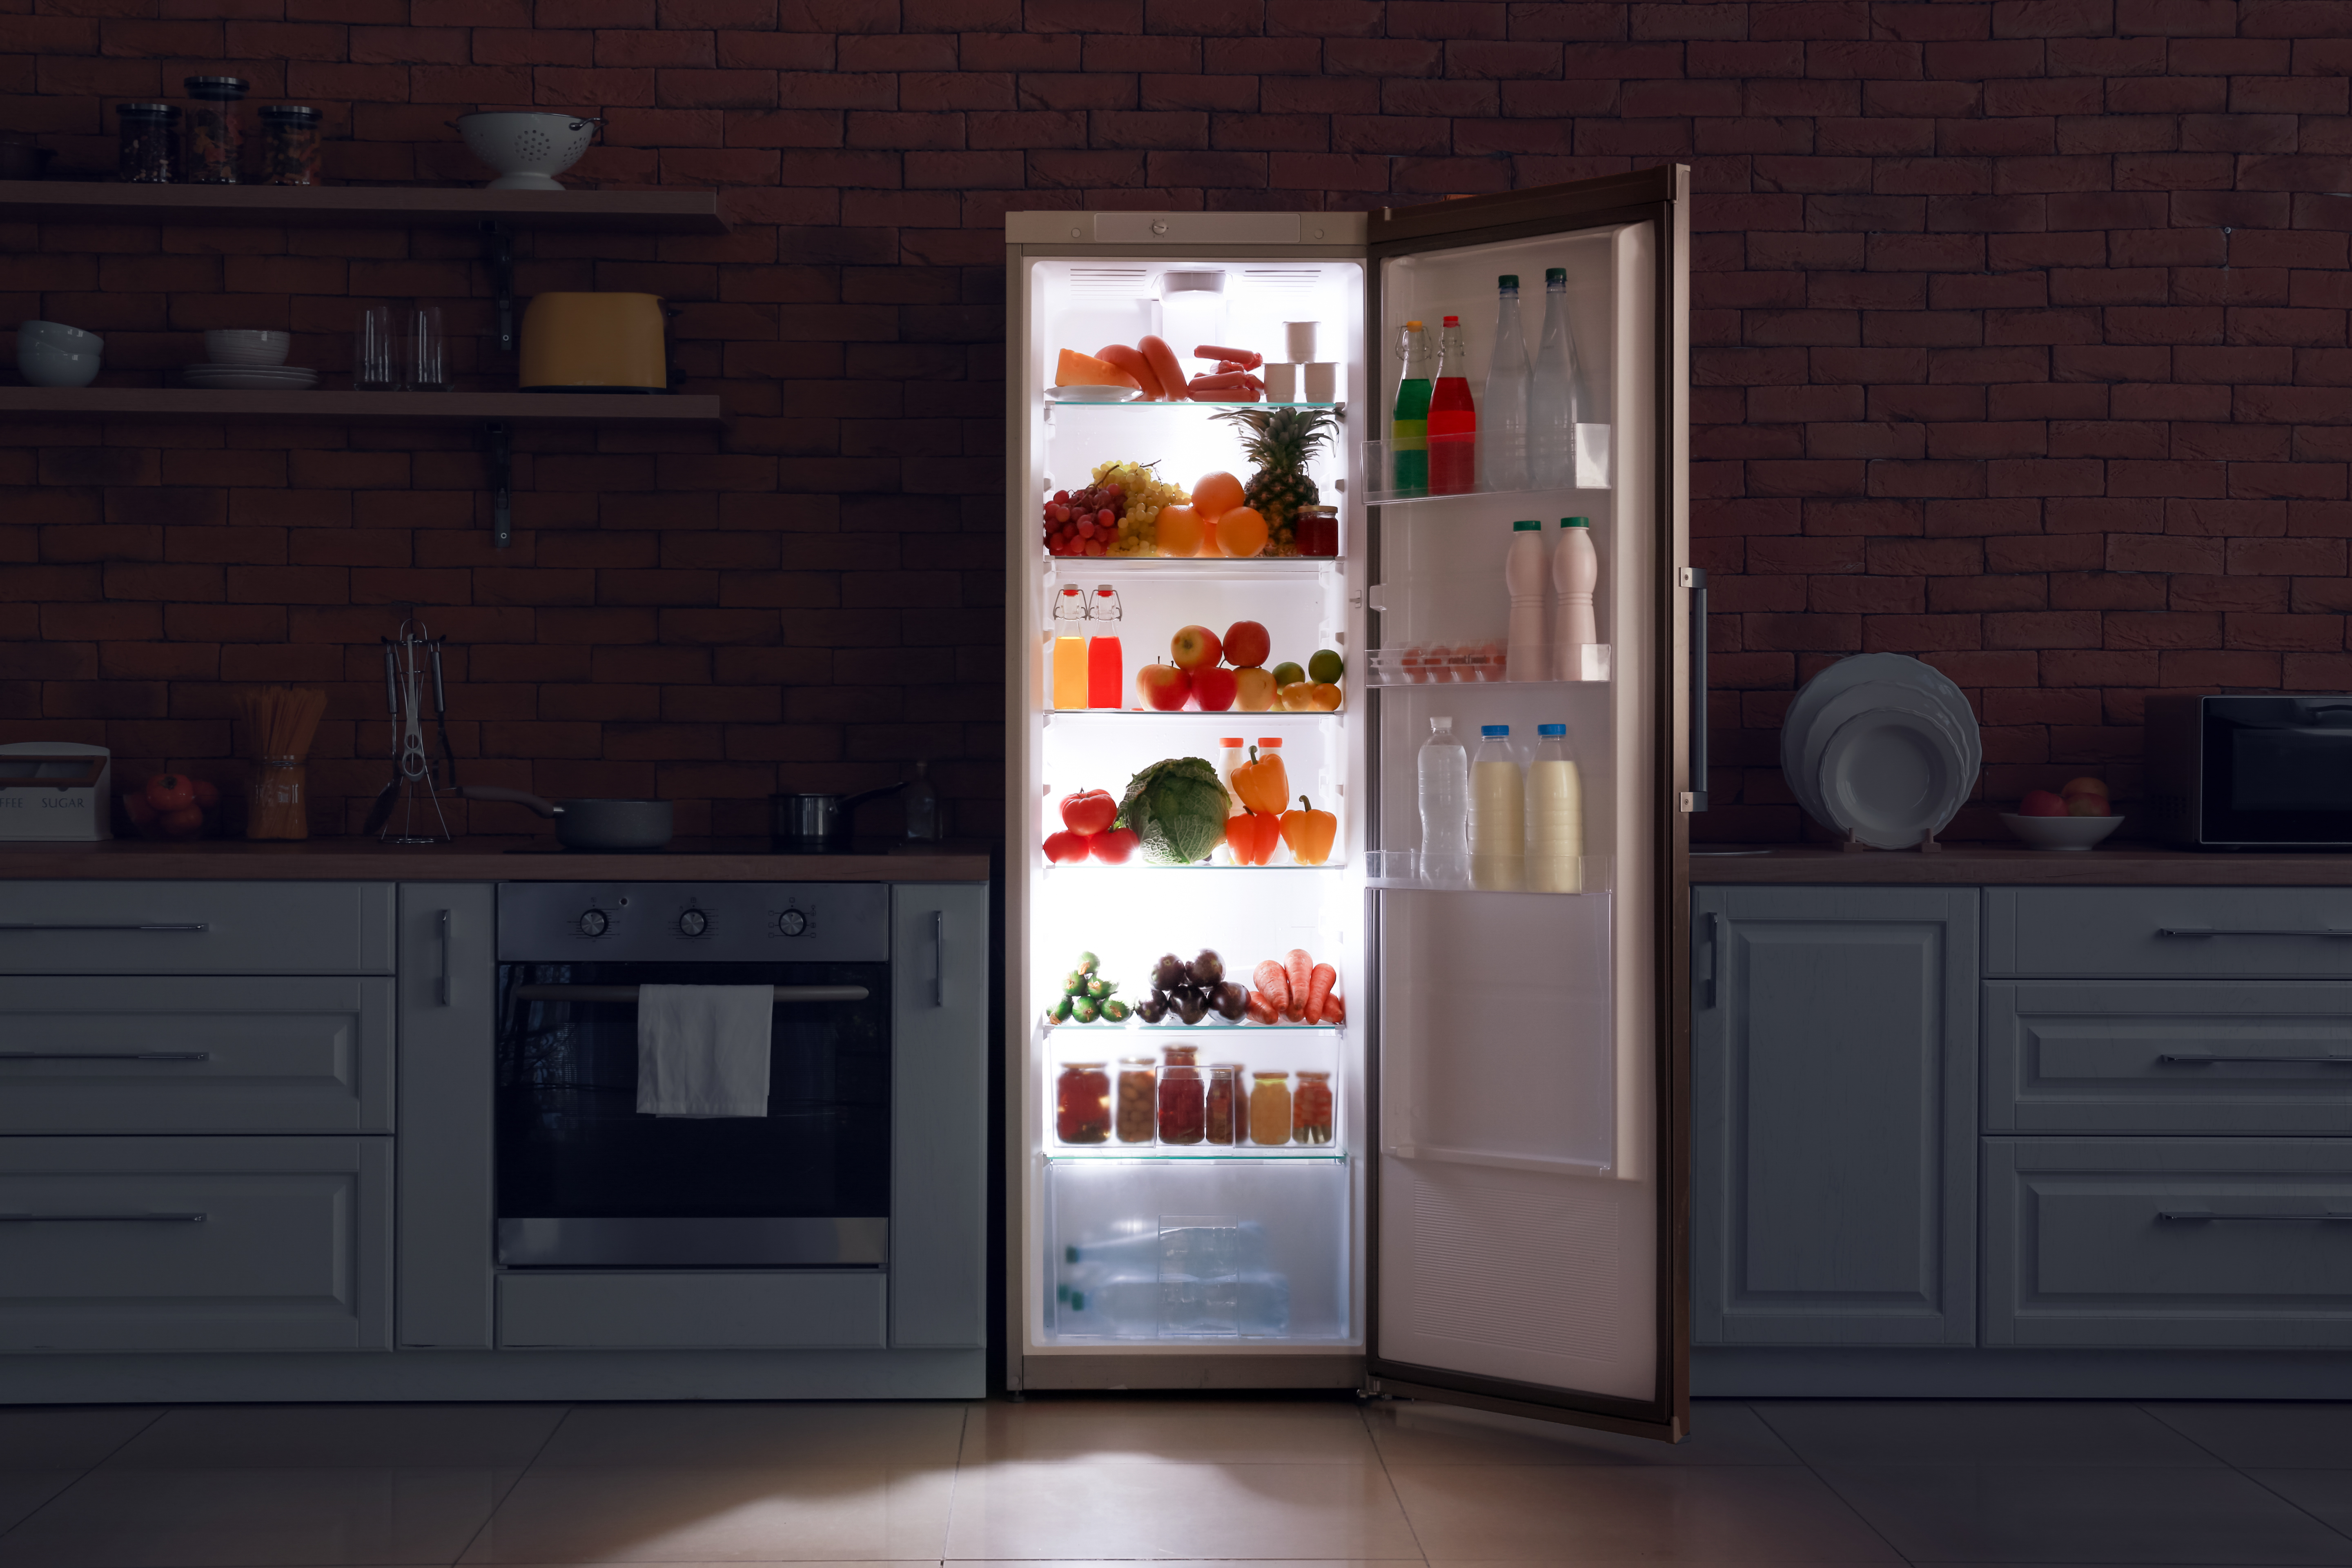  Should the refrigerator be turned off at night 